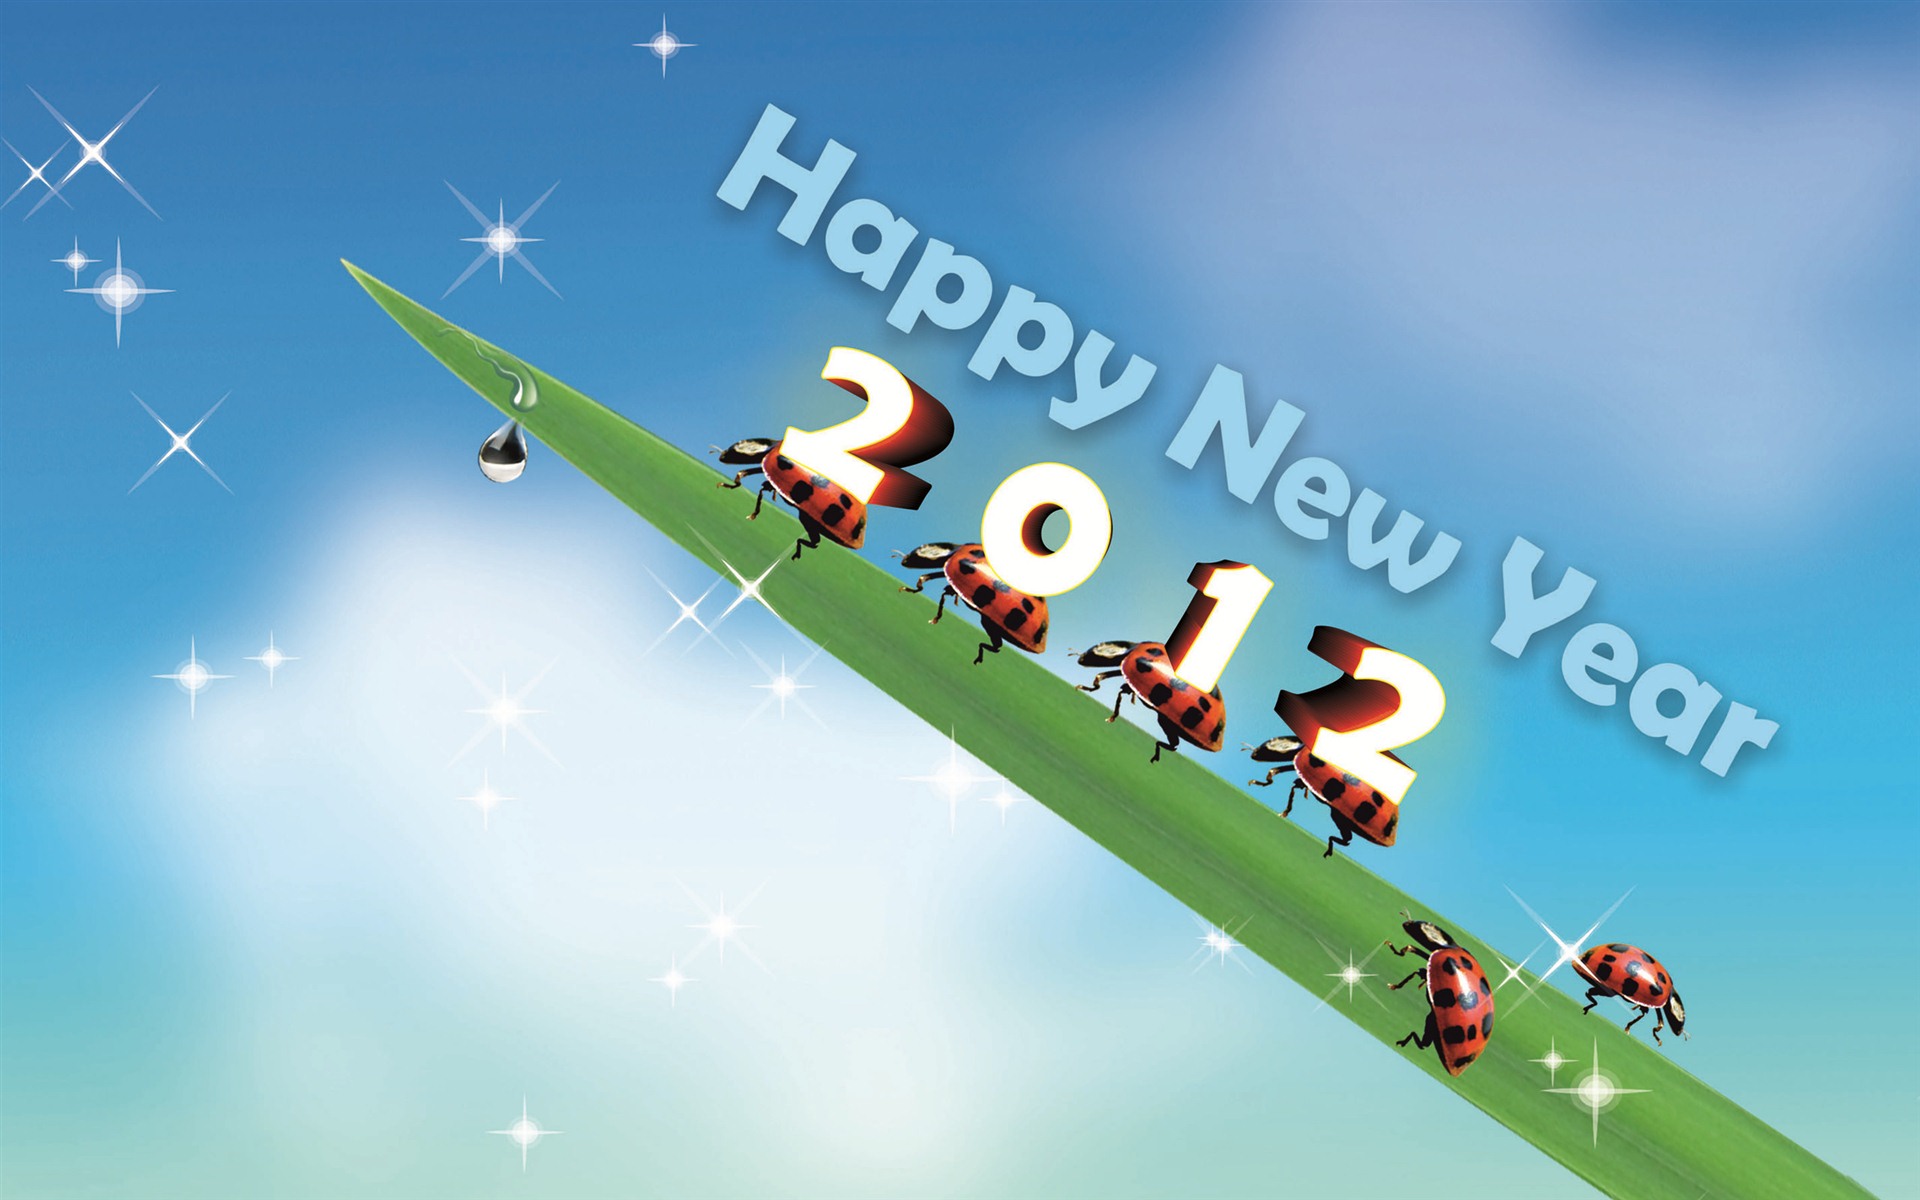 2012 New Year wallpapers (2) #8 - 1920x1200